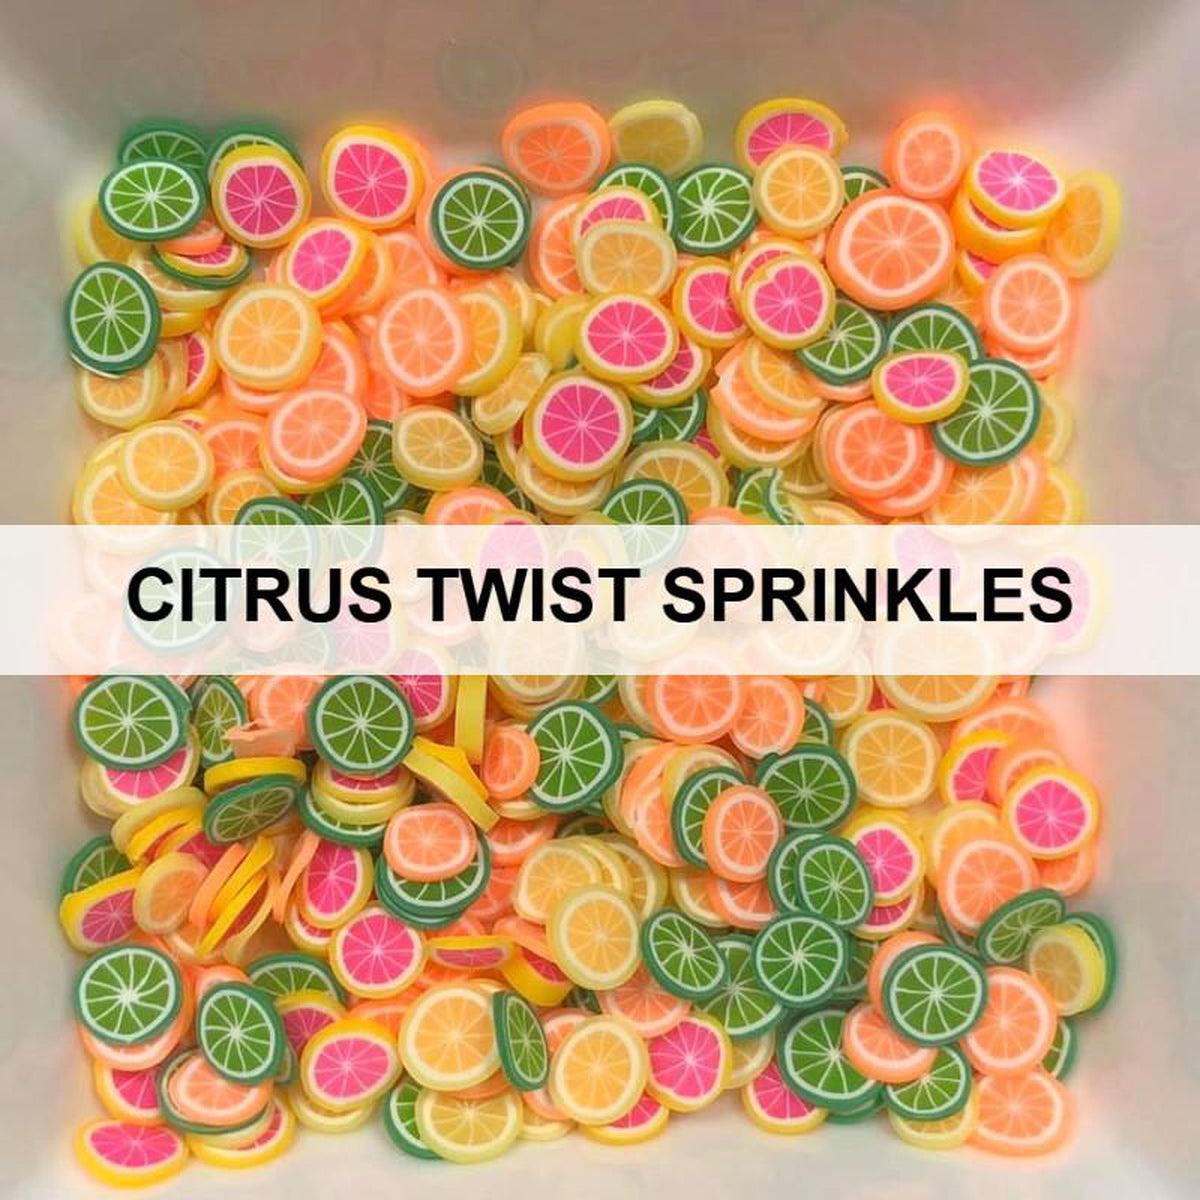 Citrus Twist Sprinkles by Kat Scrappiness - Kat Scrappiness